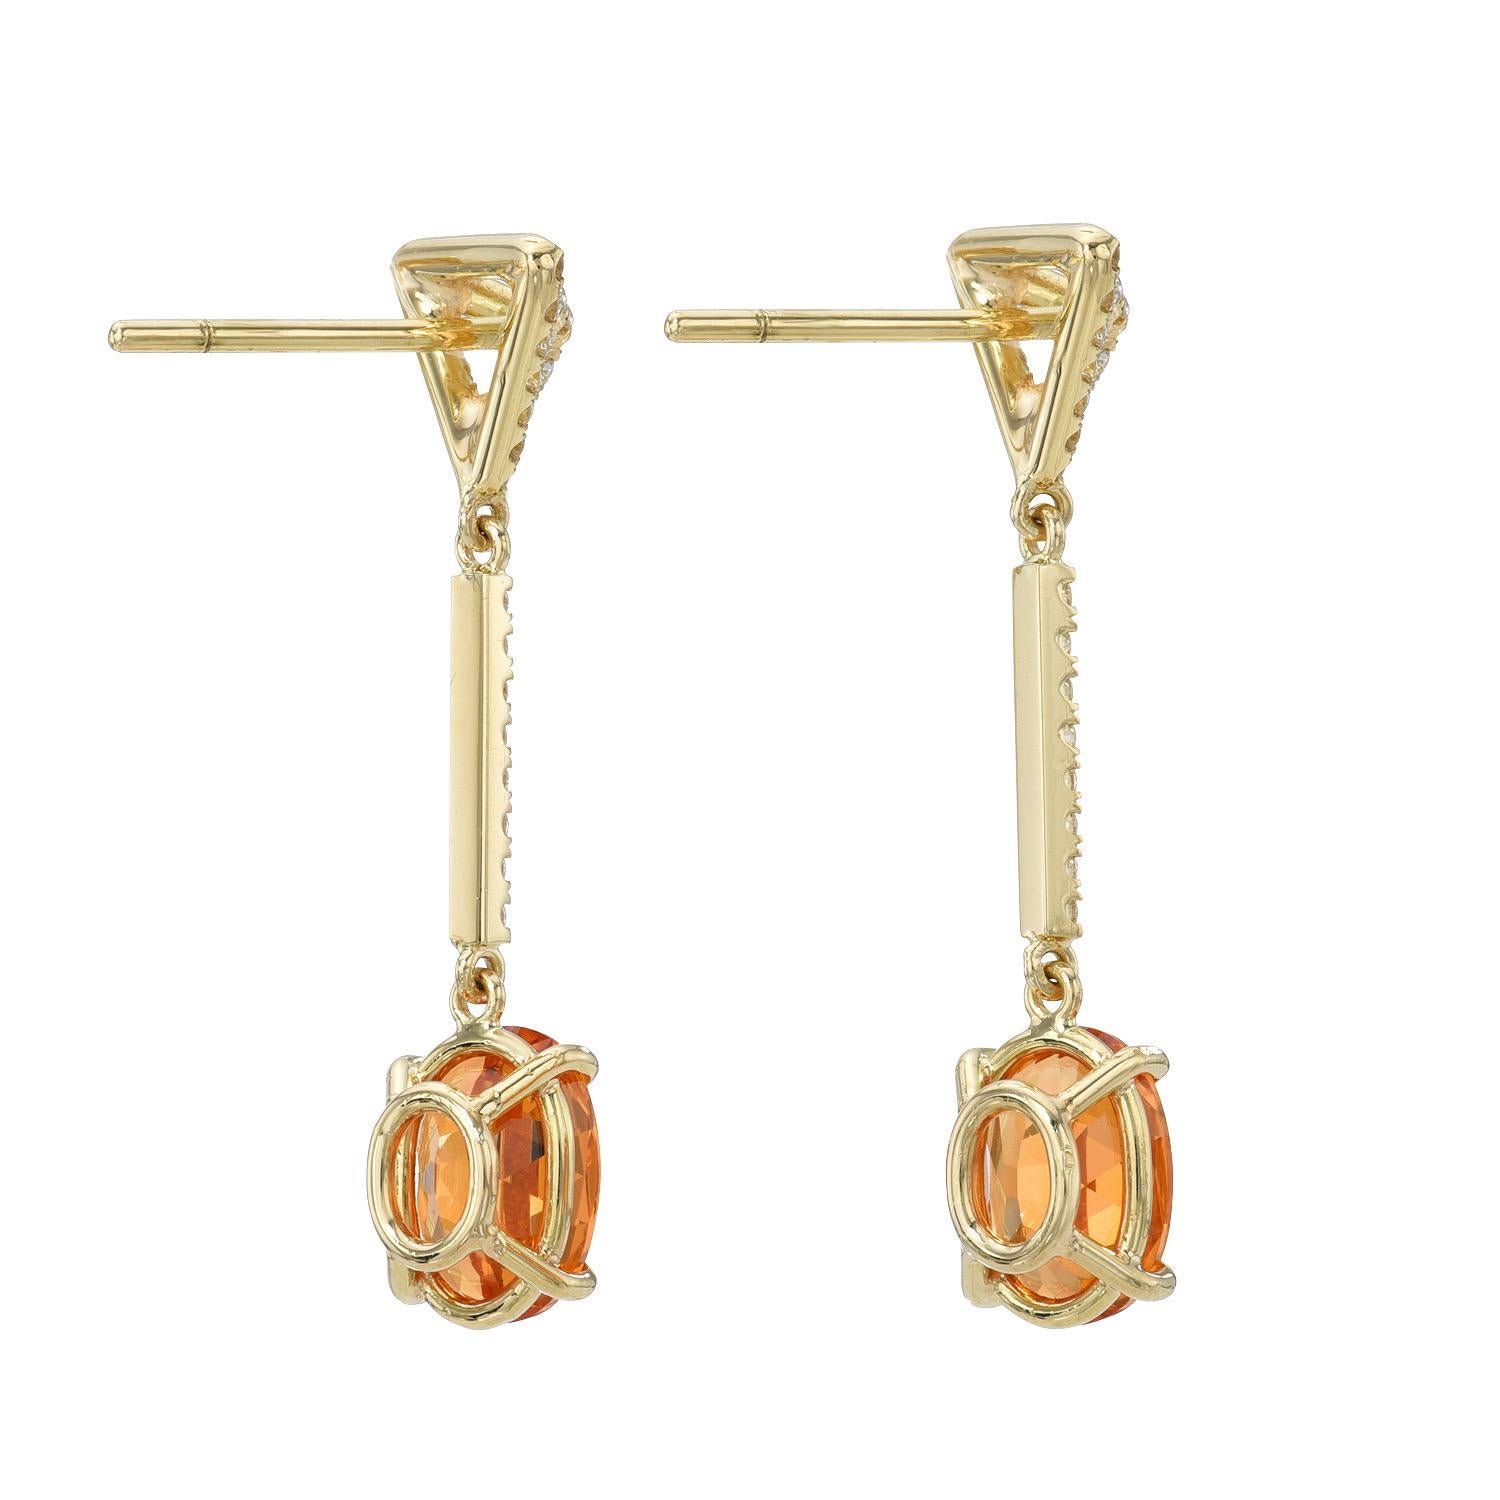 Striking 3.70 carat oval Mandarin Garnet, 18K yellow gold earrings, decorated with a total of 0.35 carat round brilliant collection diamonds, suspending from our signature three dimensional triangle diamond studs.
Crafted by extremely skilled hands